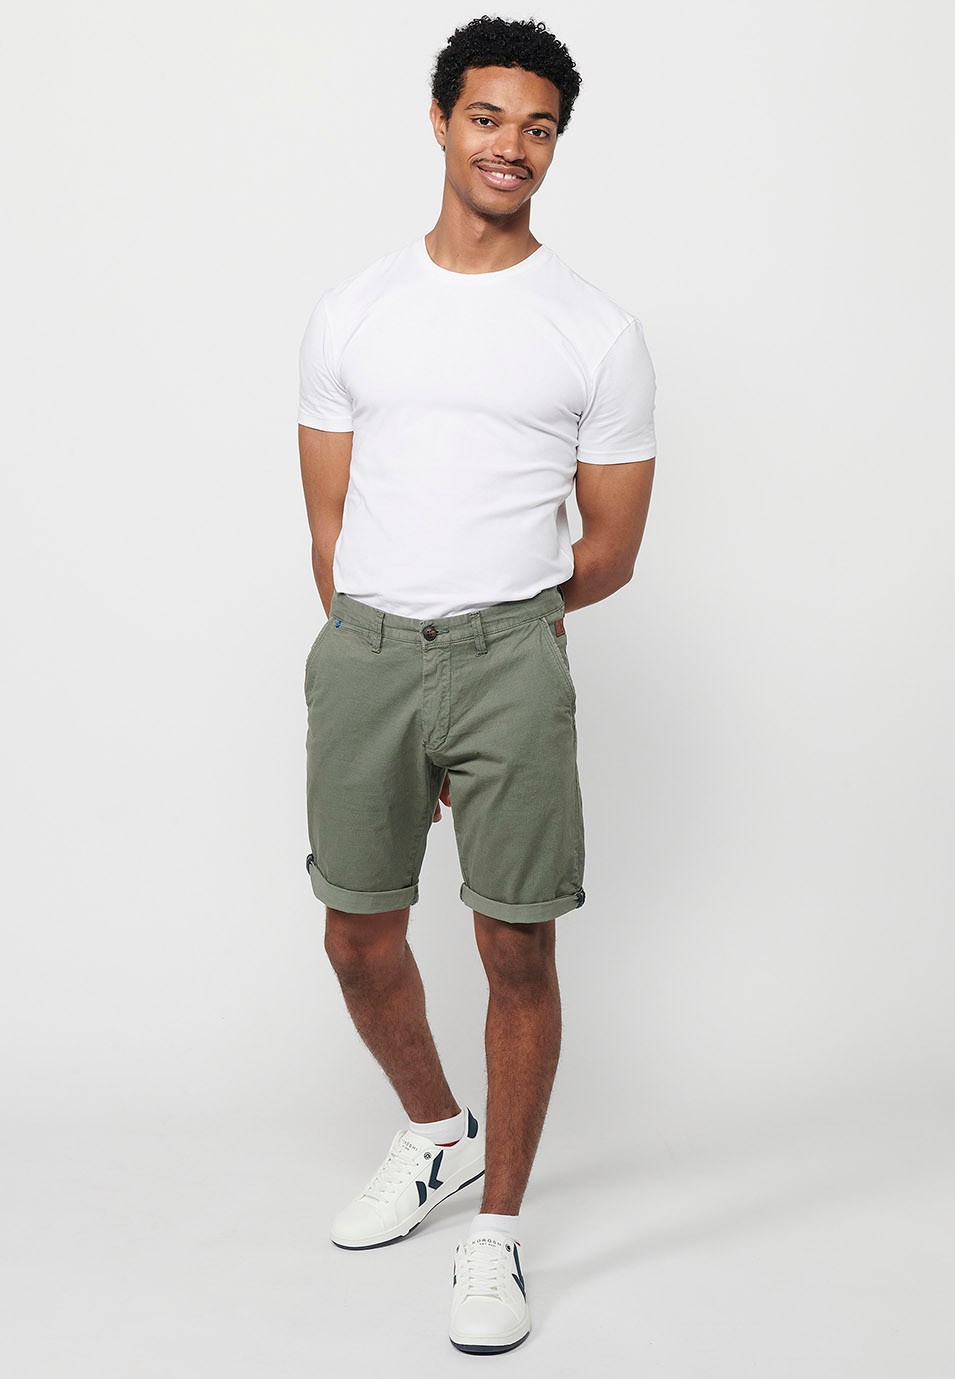 Bermuda Chino Shorts with Turn-Up Finish with Front Zipper and Button Closure with Four Pockets in Green Color for Men